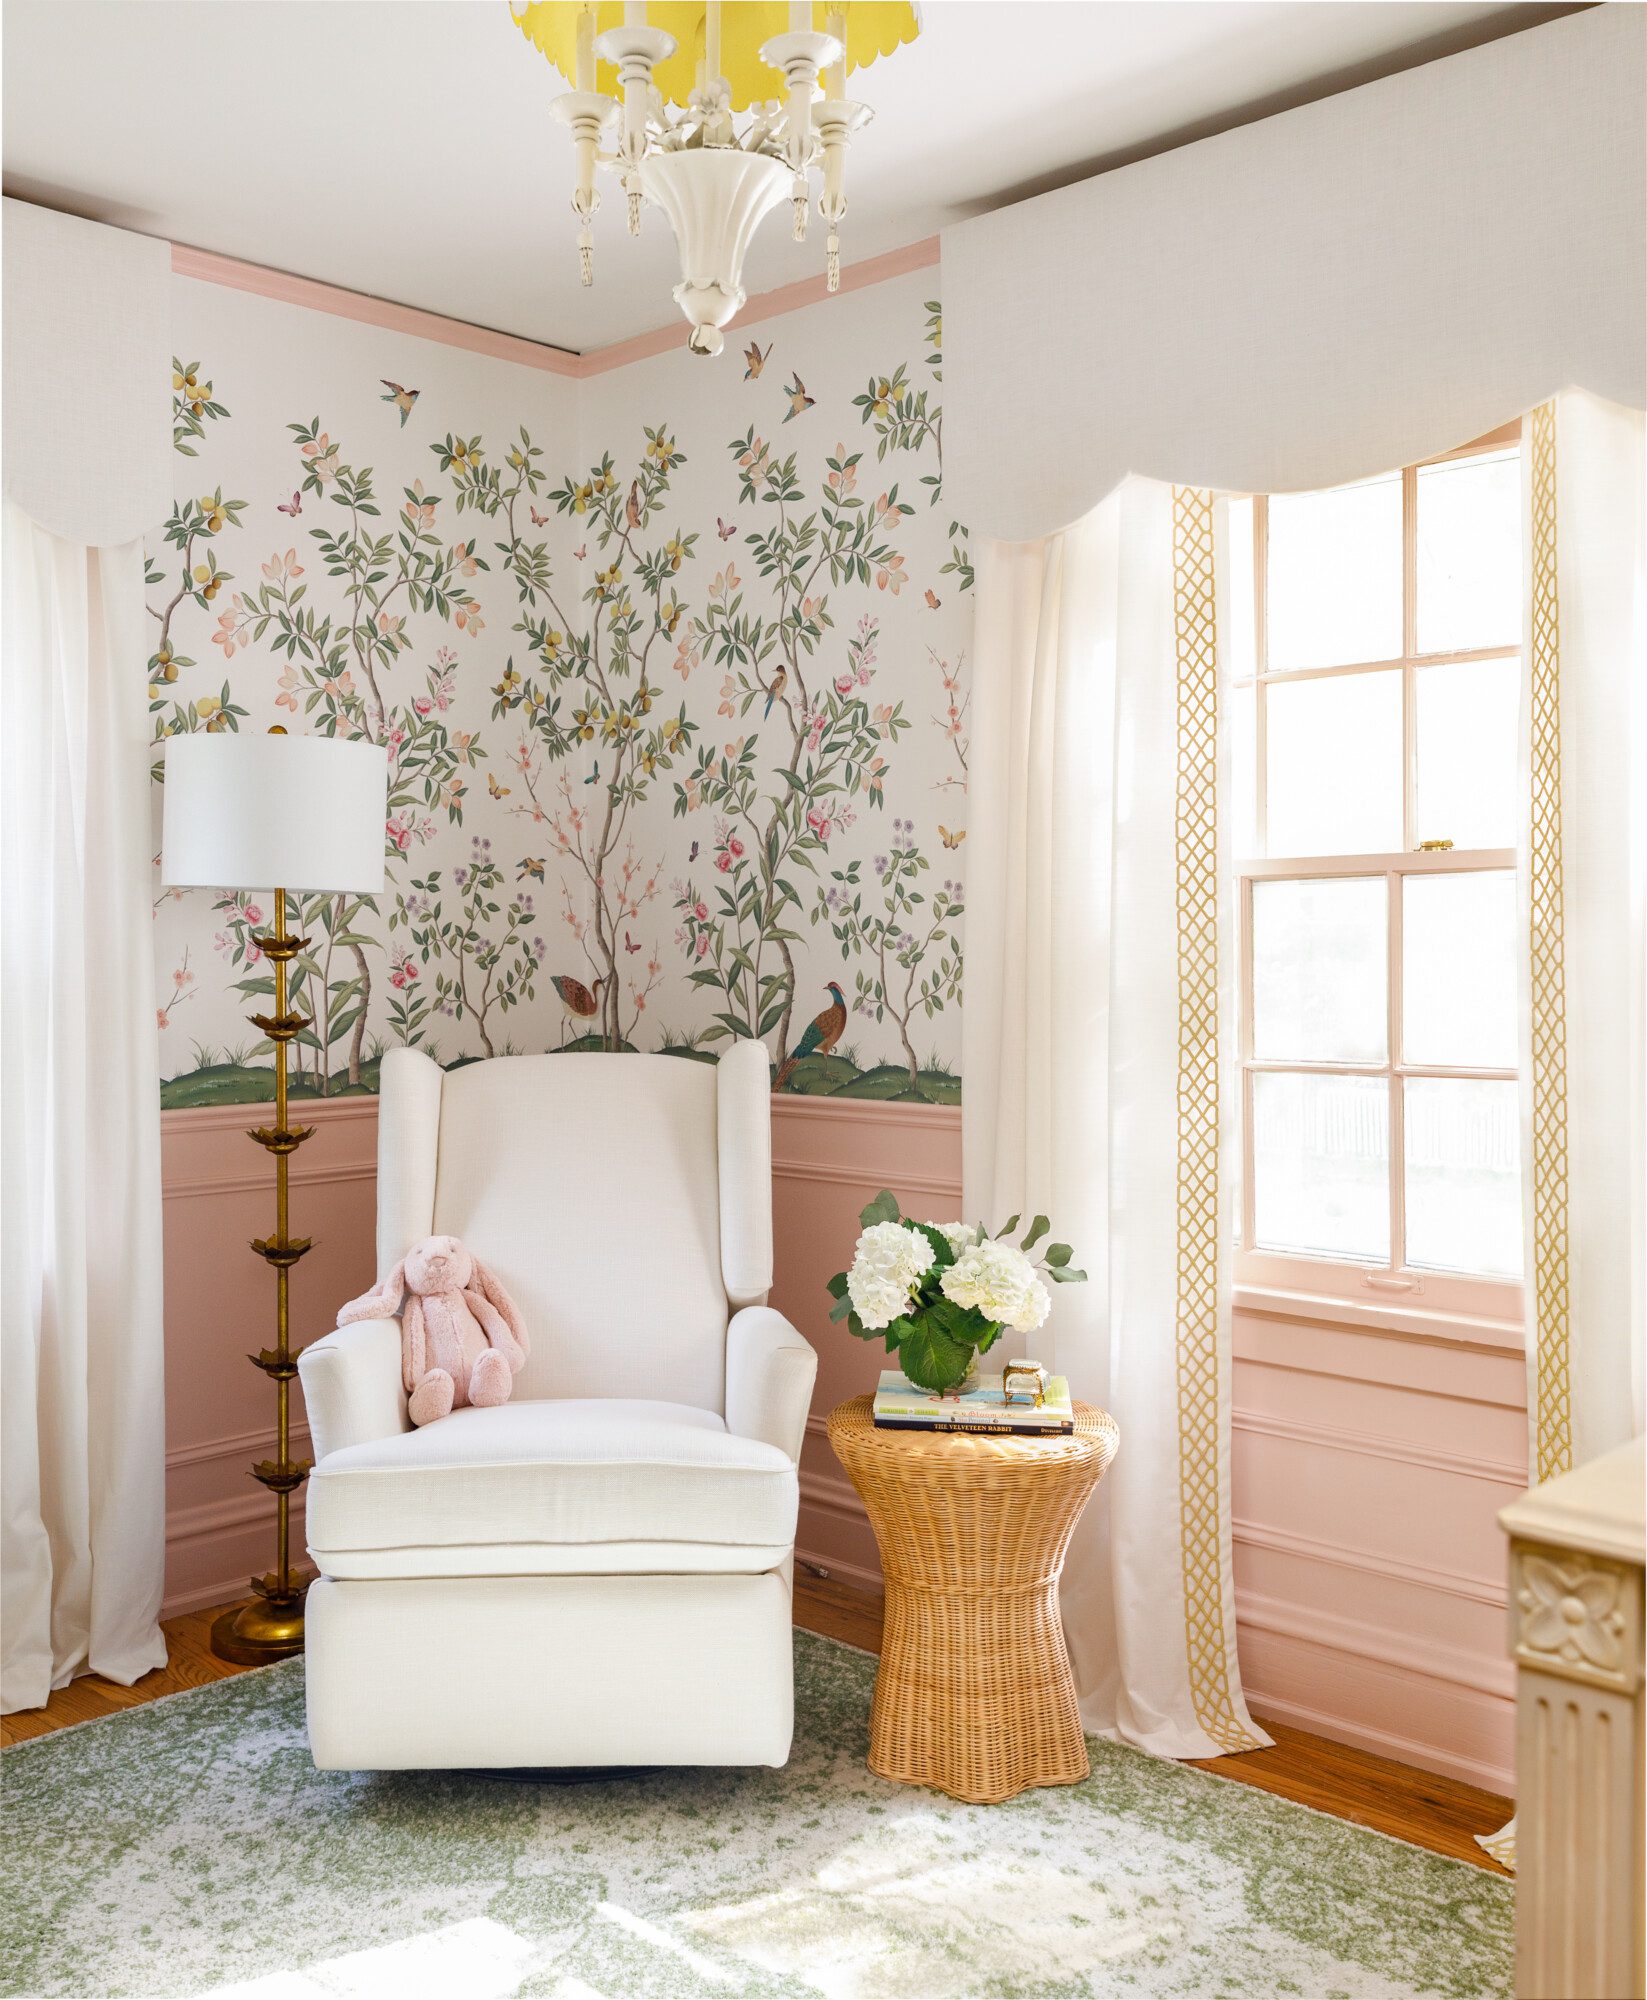 whimsical botanical print wallpaper and a cozy chair in the corner.